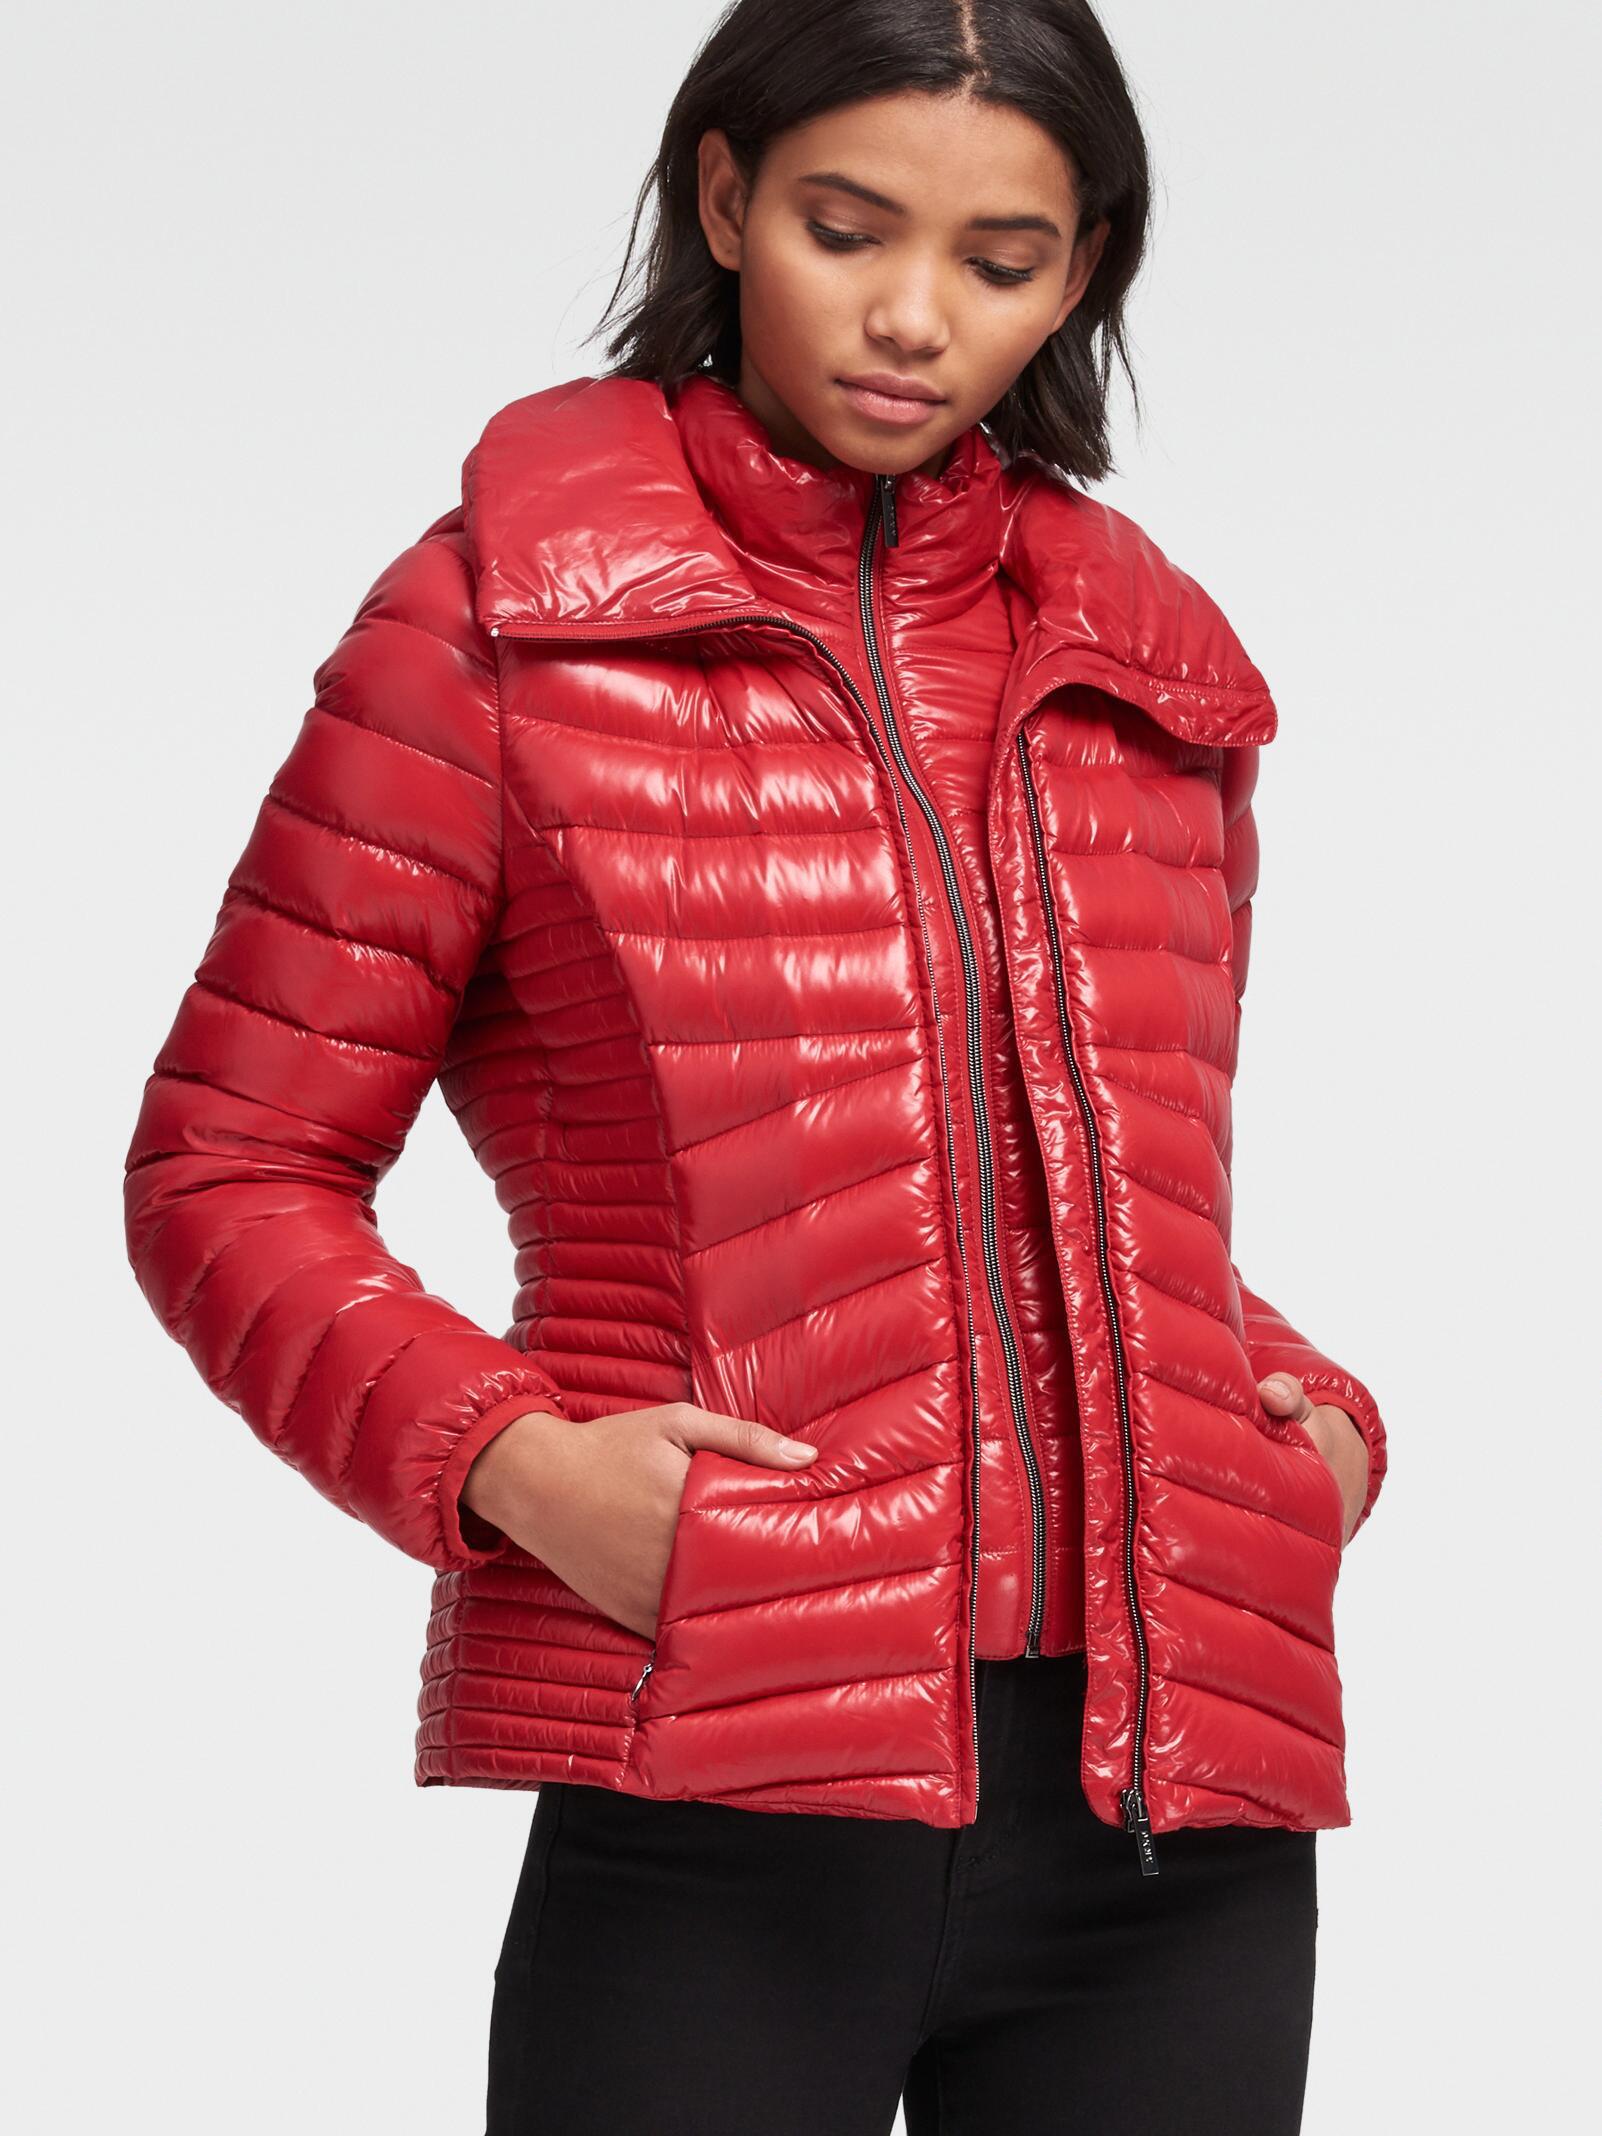 Dkny Packable Puffer Jacket With Hood